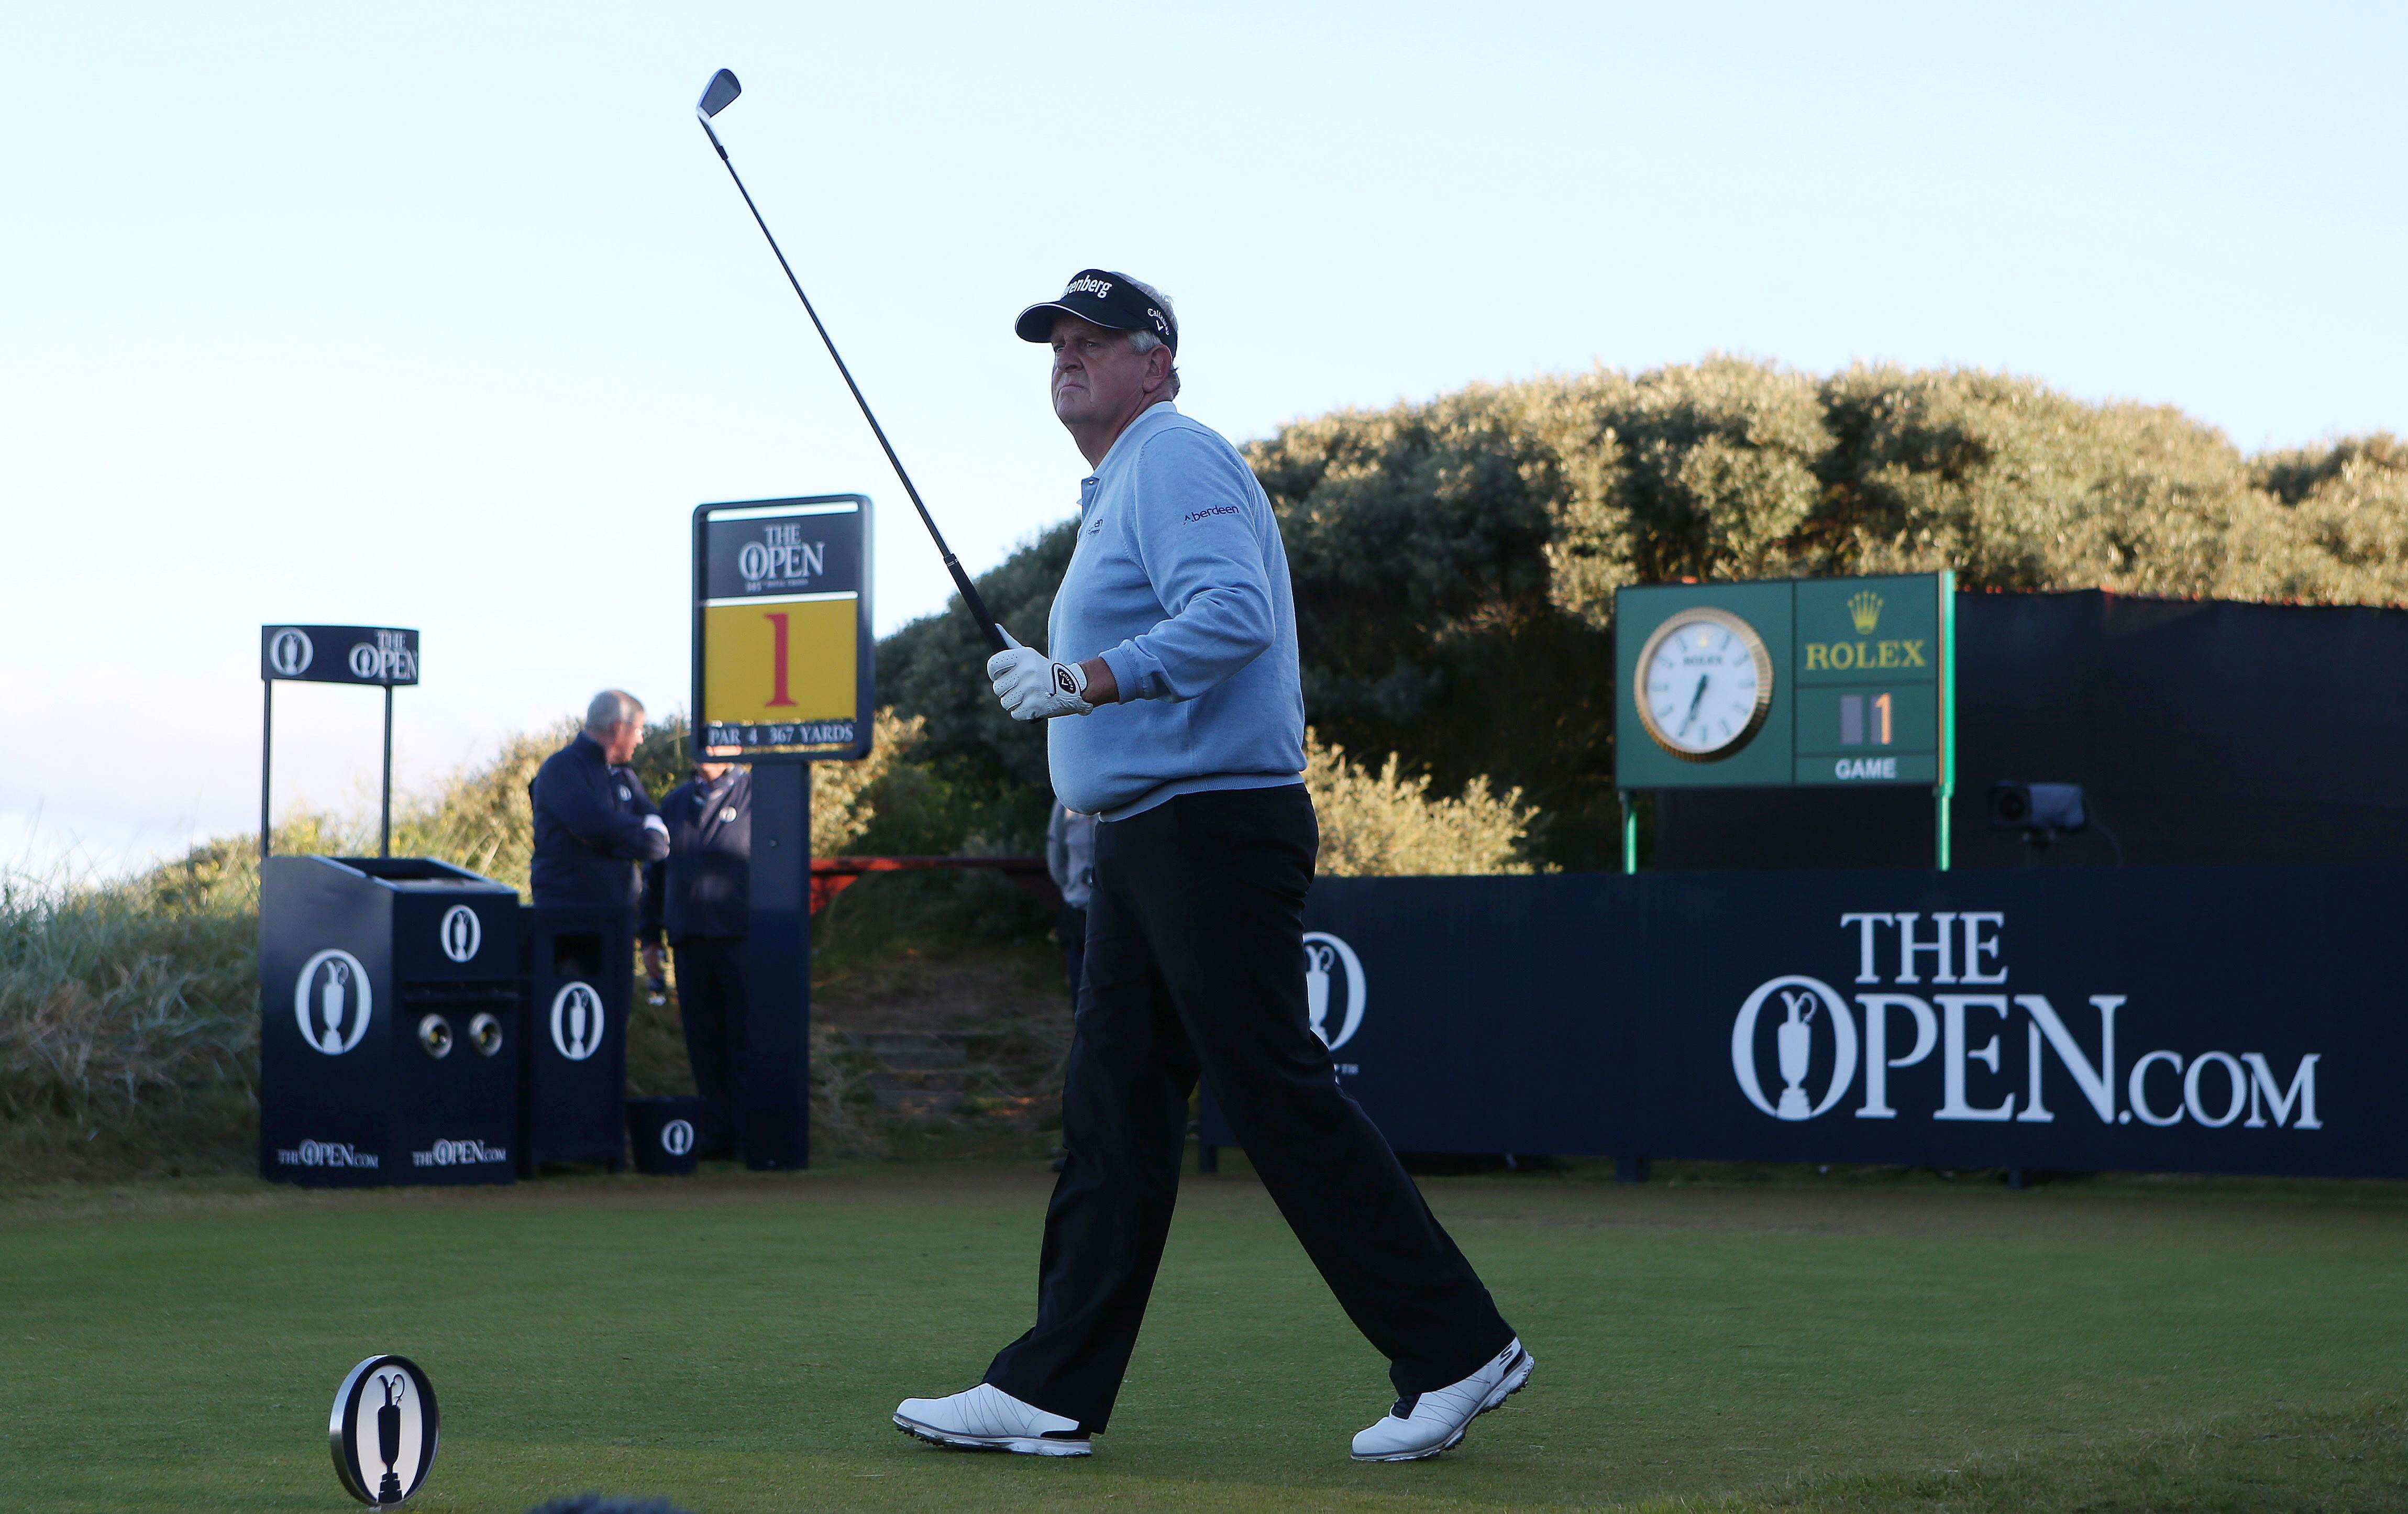 Scotland's Colin Montgomerie walks off the first tee at Royal Troon after playing the opening shot of the British Open. Photo: Reuters